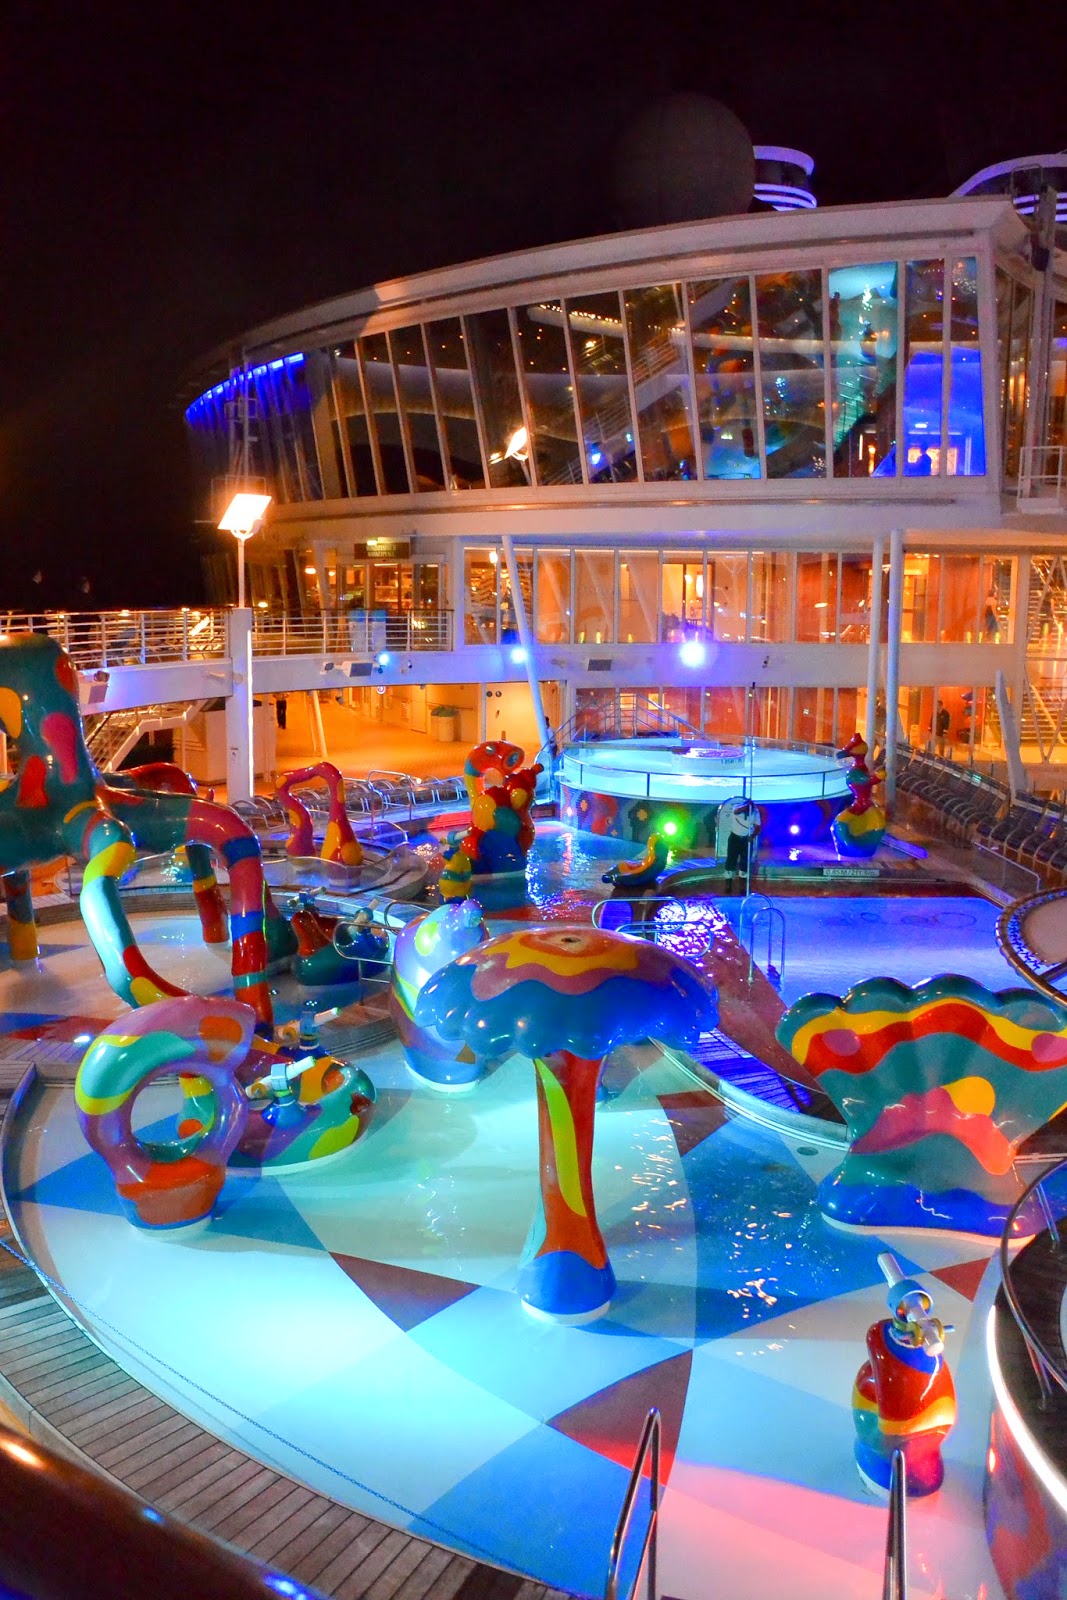 Royal Caribean Allure of the Seas Cruise: Things To Do